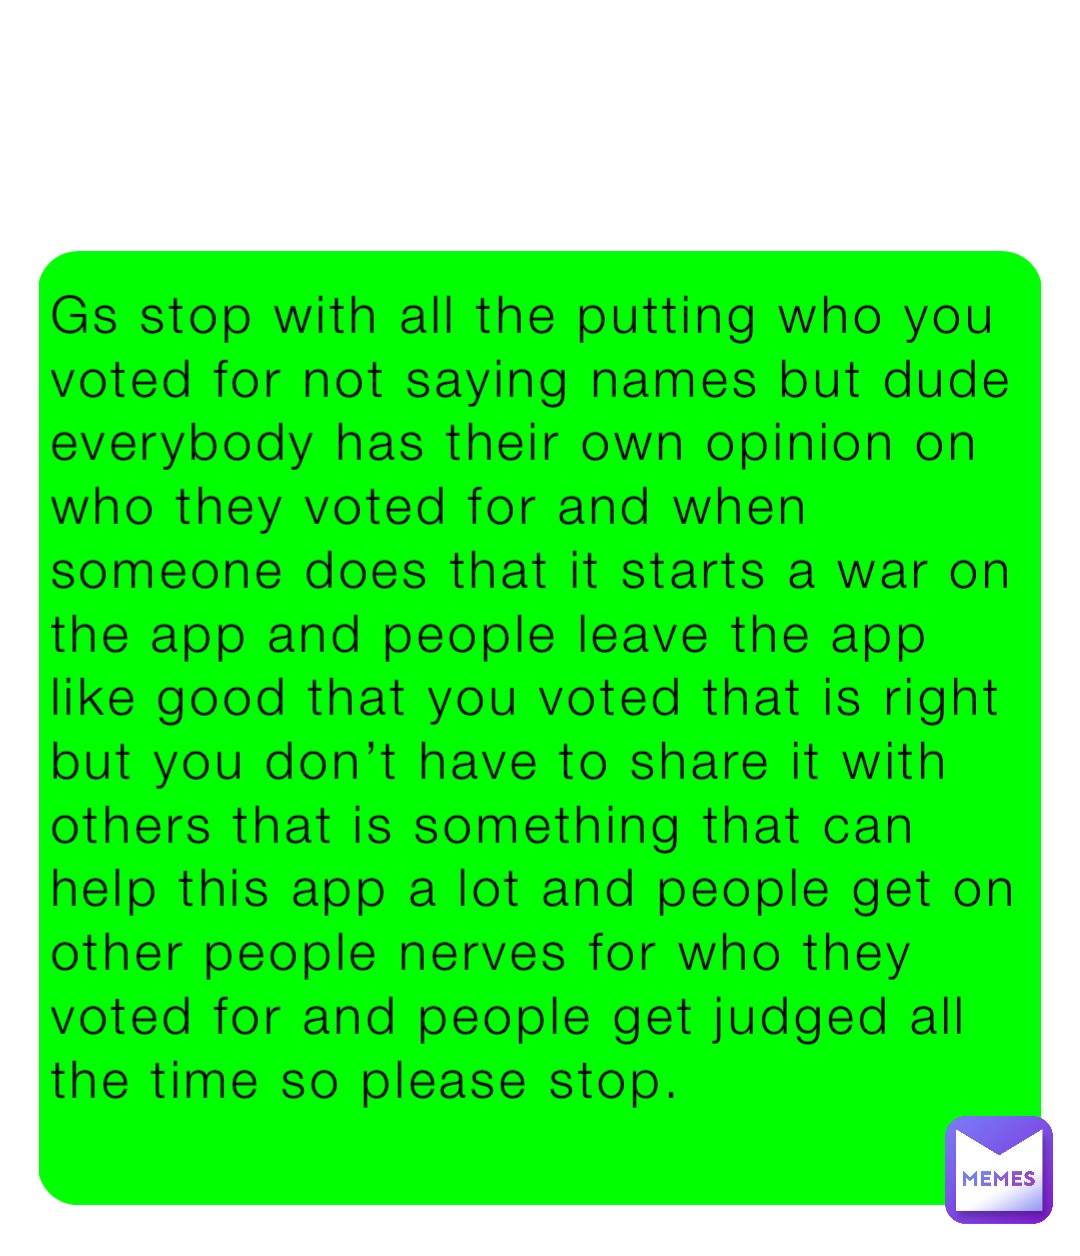 Gs stop with all the putting who you voted for not saying names but dude everybody has their own opinion on who they voted for and when someone does that it starts a war on the app and people leave the app like good that you voted that is right but you don’t have to share it with others that is something that can help this app a lot and people get on other people nerves for who they voted for and people get judged all the time so please stop.